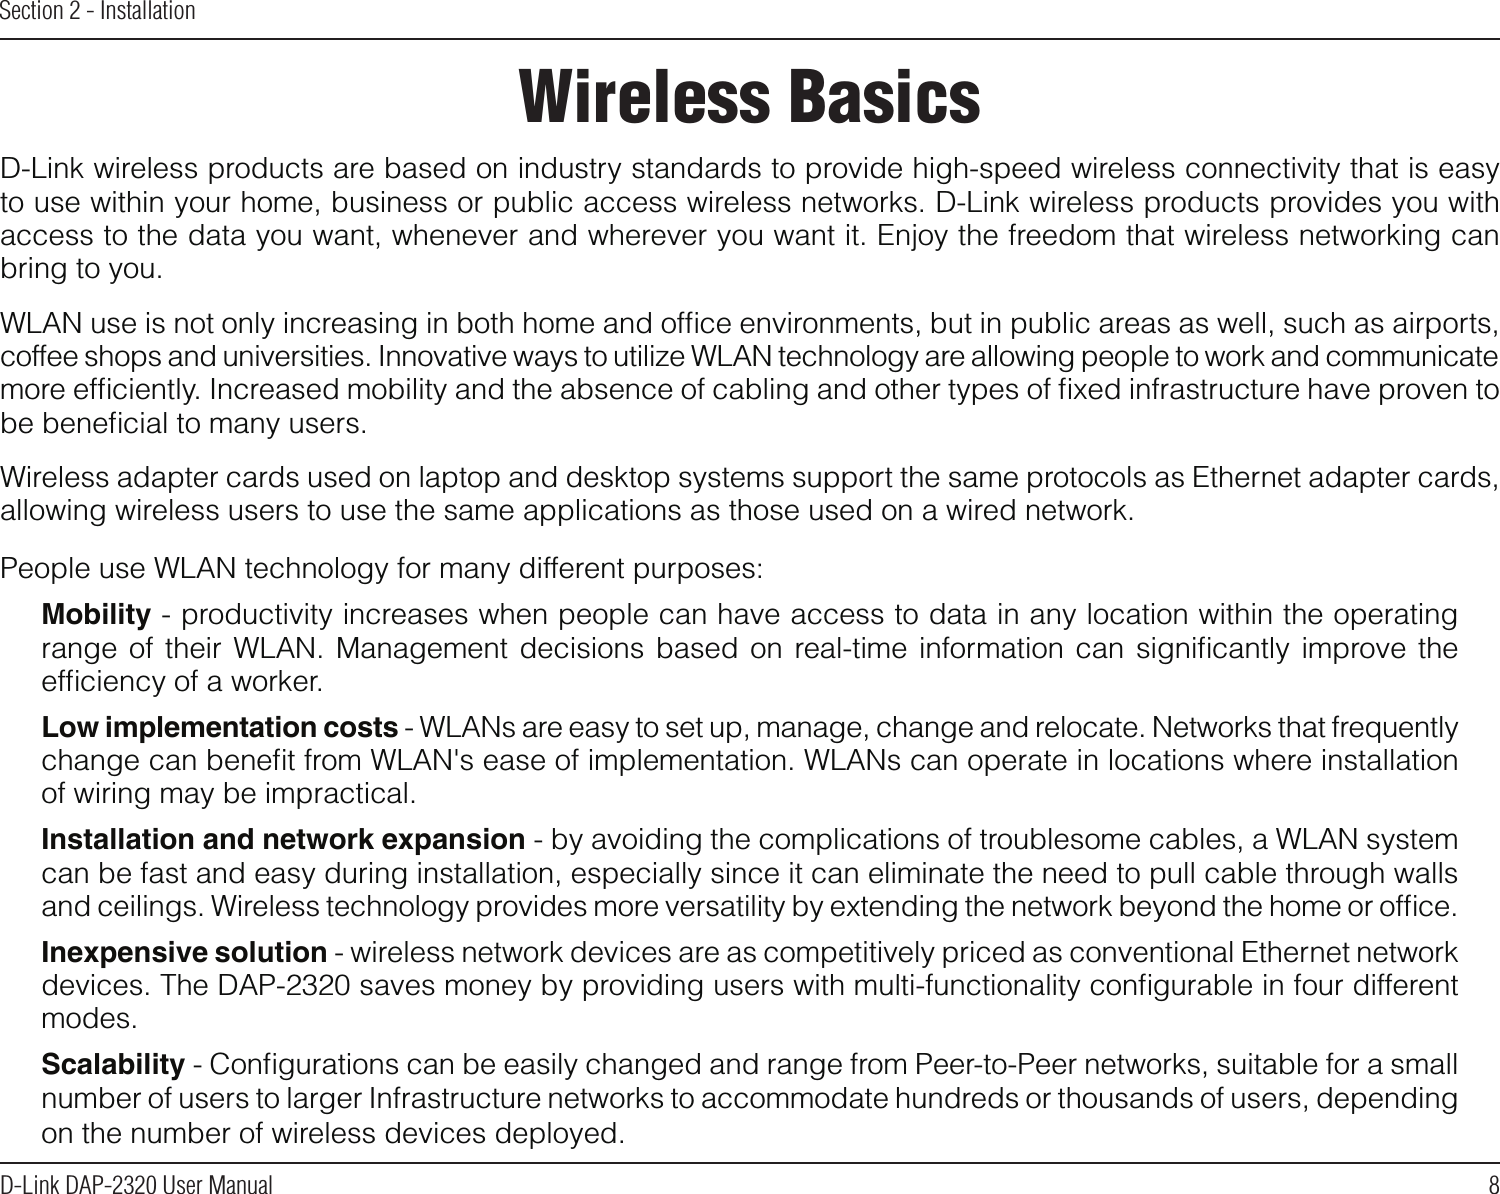 8D-Link DAP-2320 User ManualSection 2 - InstallationWireless BasicsD-Link wireless products are based on industry standards to provide high-speed wireless connectivity that is easy to use within your home, business or public access wireless networks. D-Link wireless products provides you with access to the data you want, whenever and wherever you want it. Enjoy the freedom that wireless networking can bring to you.WLAN use is not only increasing in both home and ofﬁce environments, but in public areas as well, such as airports, coffee shops and universities. Innovative ways to utilize WLAN technology are allowing people to work and communicate more efﬁciently. Increased mobility and the absence of cabling and other types of ﬁxed infrastructure have proven to be beneﬁcial to many users.  Wireless adapter cards used on laptop and desktop systems support the same protocols as Ethernet adapter cards, allowing wireless users to use the same applications as those used on a wired network.People use WLAN technology for many different purposes:Mobility - productivity increases when people can have access to data in any location within the operating range of  their  WLAN.  Management  decisions  based on  real-time information  can  signiﬁcantly  improve the efﬁciency of a worker.Low implementation costs - WLANs are easy to set up, manage, change and relocate. Networks that frequently change can beneﬁt from WLAN&apos;s ease of implementation. WLANs can operate in locations where installation of wiring may be impractical.Installation and network expansion - by avoiding the complications of troublesome cables, a WLAN system can be fast and easy during installation, especially since it can eliminate the need to pull cable through walls and ceilings. Wireless technology provides more versatility by extending the network beyond the home or ofﬁce.Inexpensive solution - wireless network devices are as competitively priced as conventional Ethernet network devices. The DAP-2320 saves money by providing users with multi-functionality conﬁgurable in four different modes.Scalability - Conﬁgurations can be easily changed and range from Peer-to-Peer networks, suitable for a small number of users to larger Infrastructure networks to accommodate hundreds or thousands of users, depending on the number of wireless devices deployed.